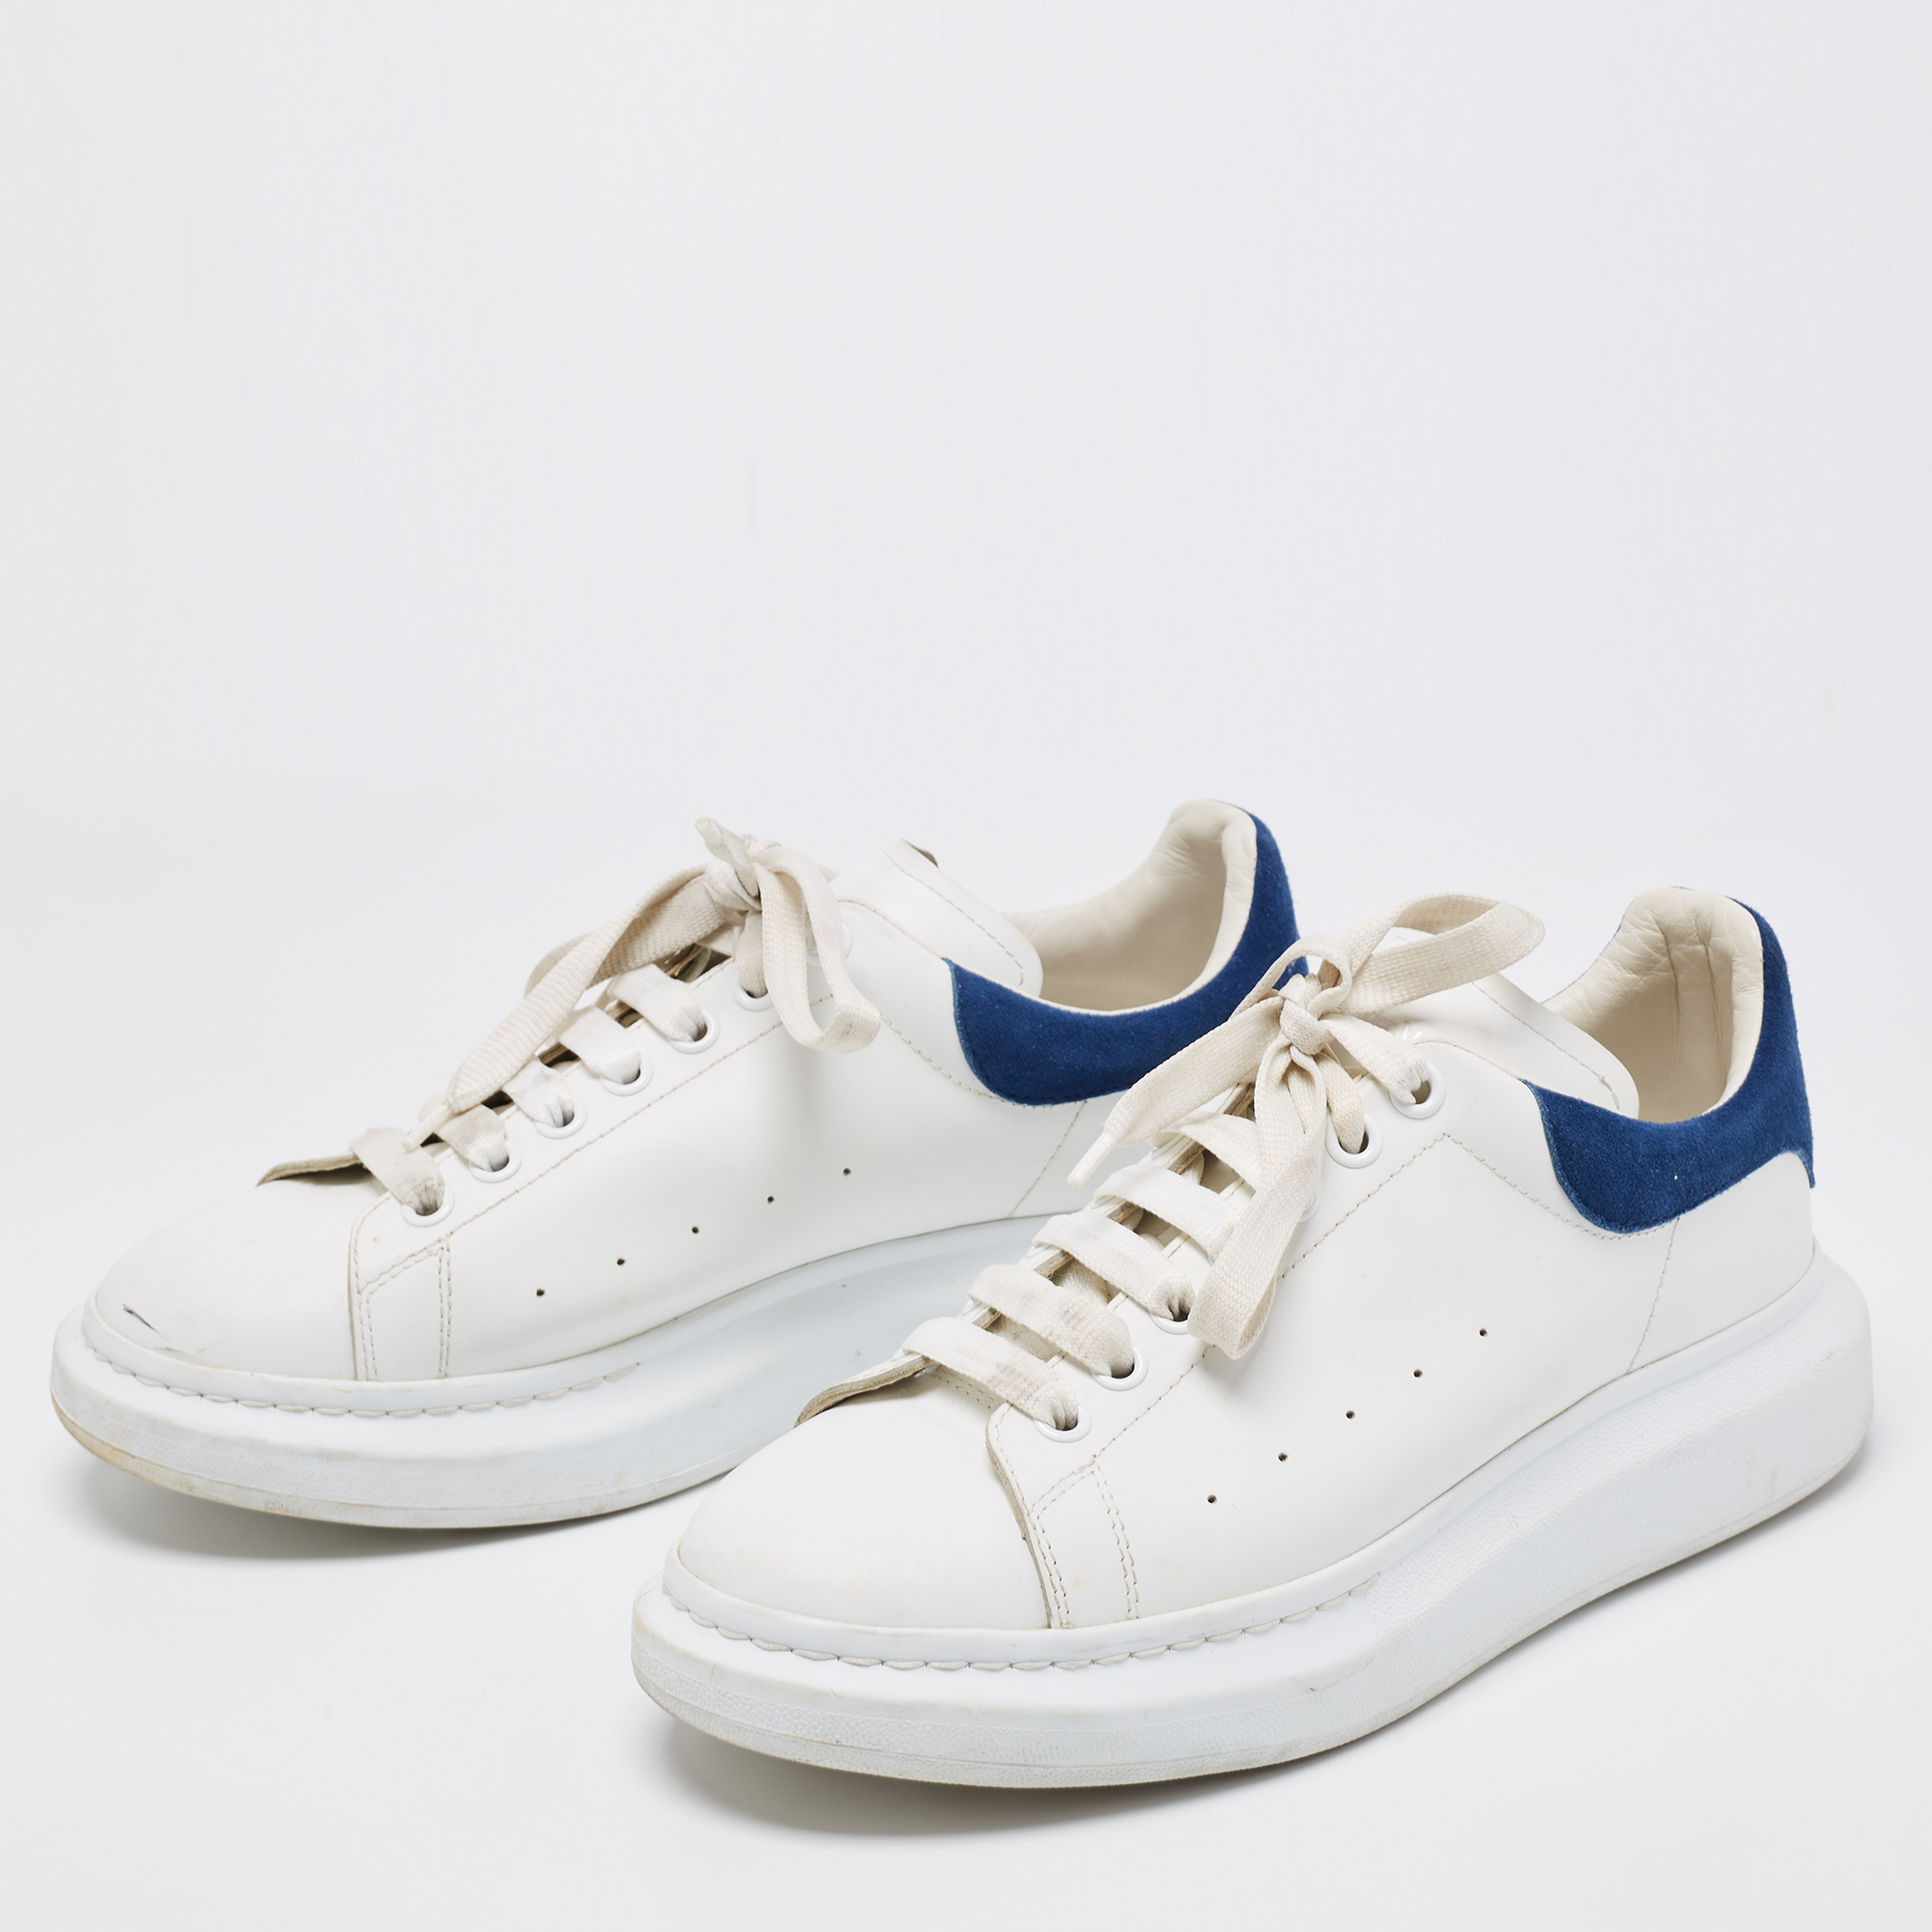 

Alexander McQueen White/Blue Leather And Suede Oversized Sneaker Size